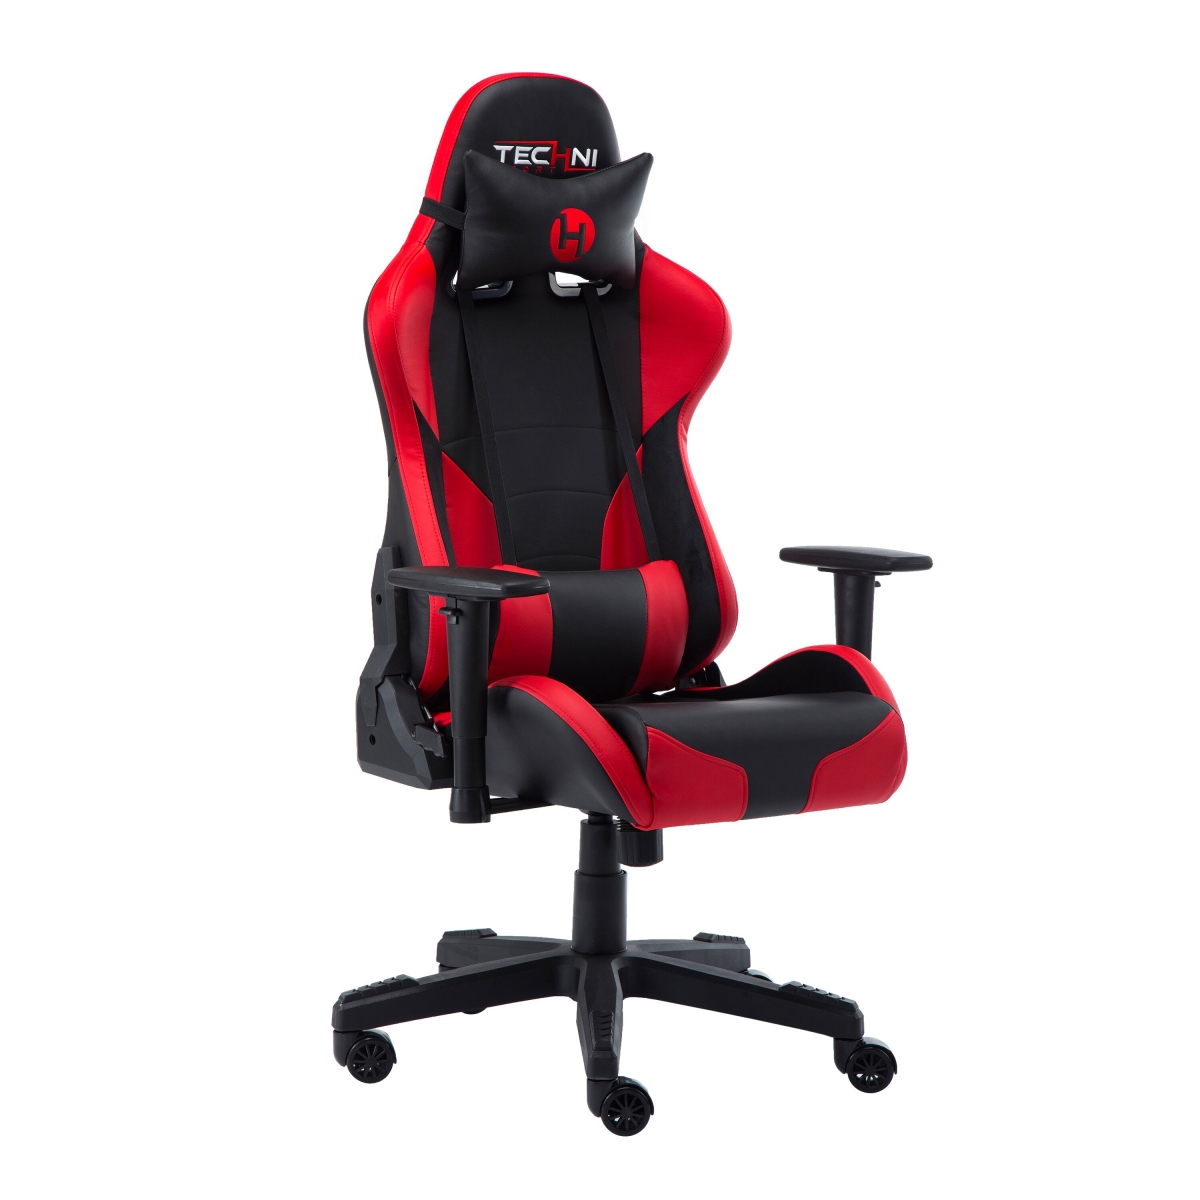 Rta-ts90-red Office-pc Gaming Chair, Red